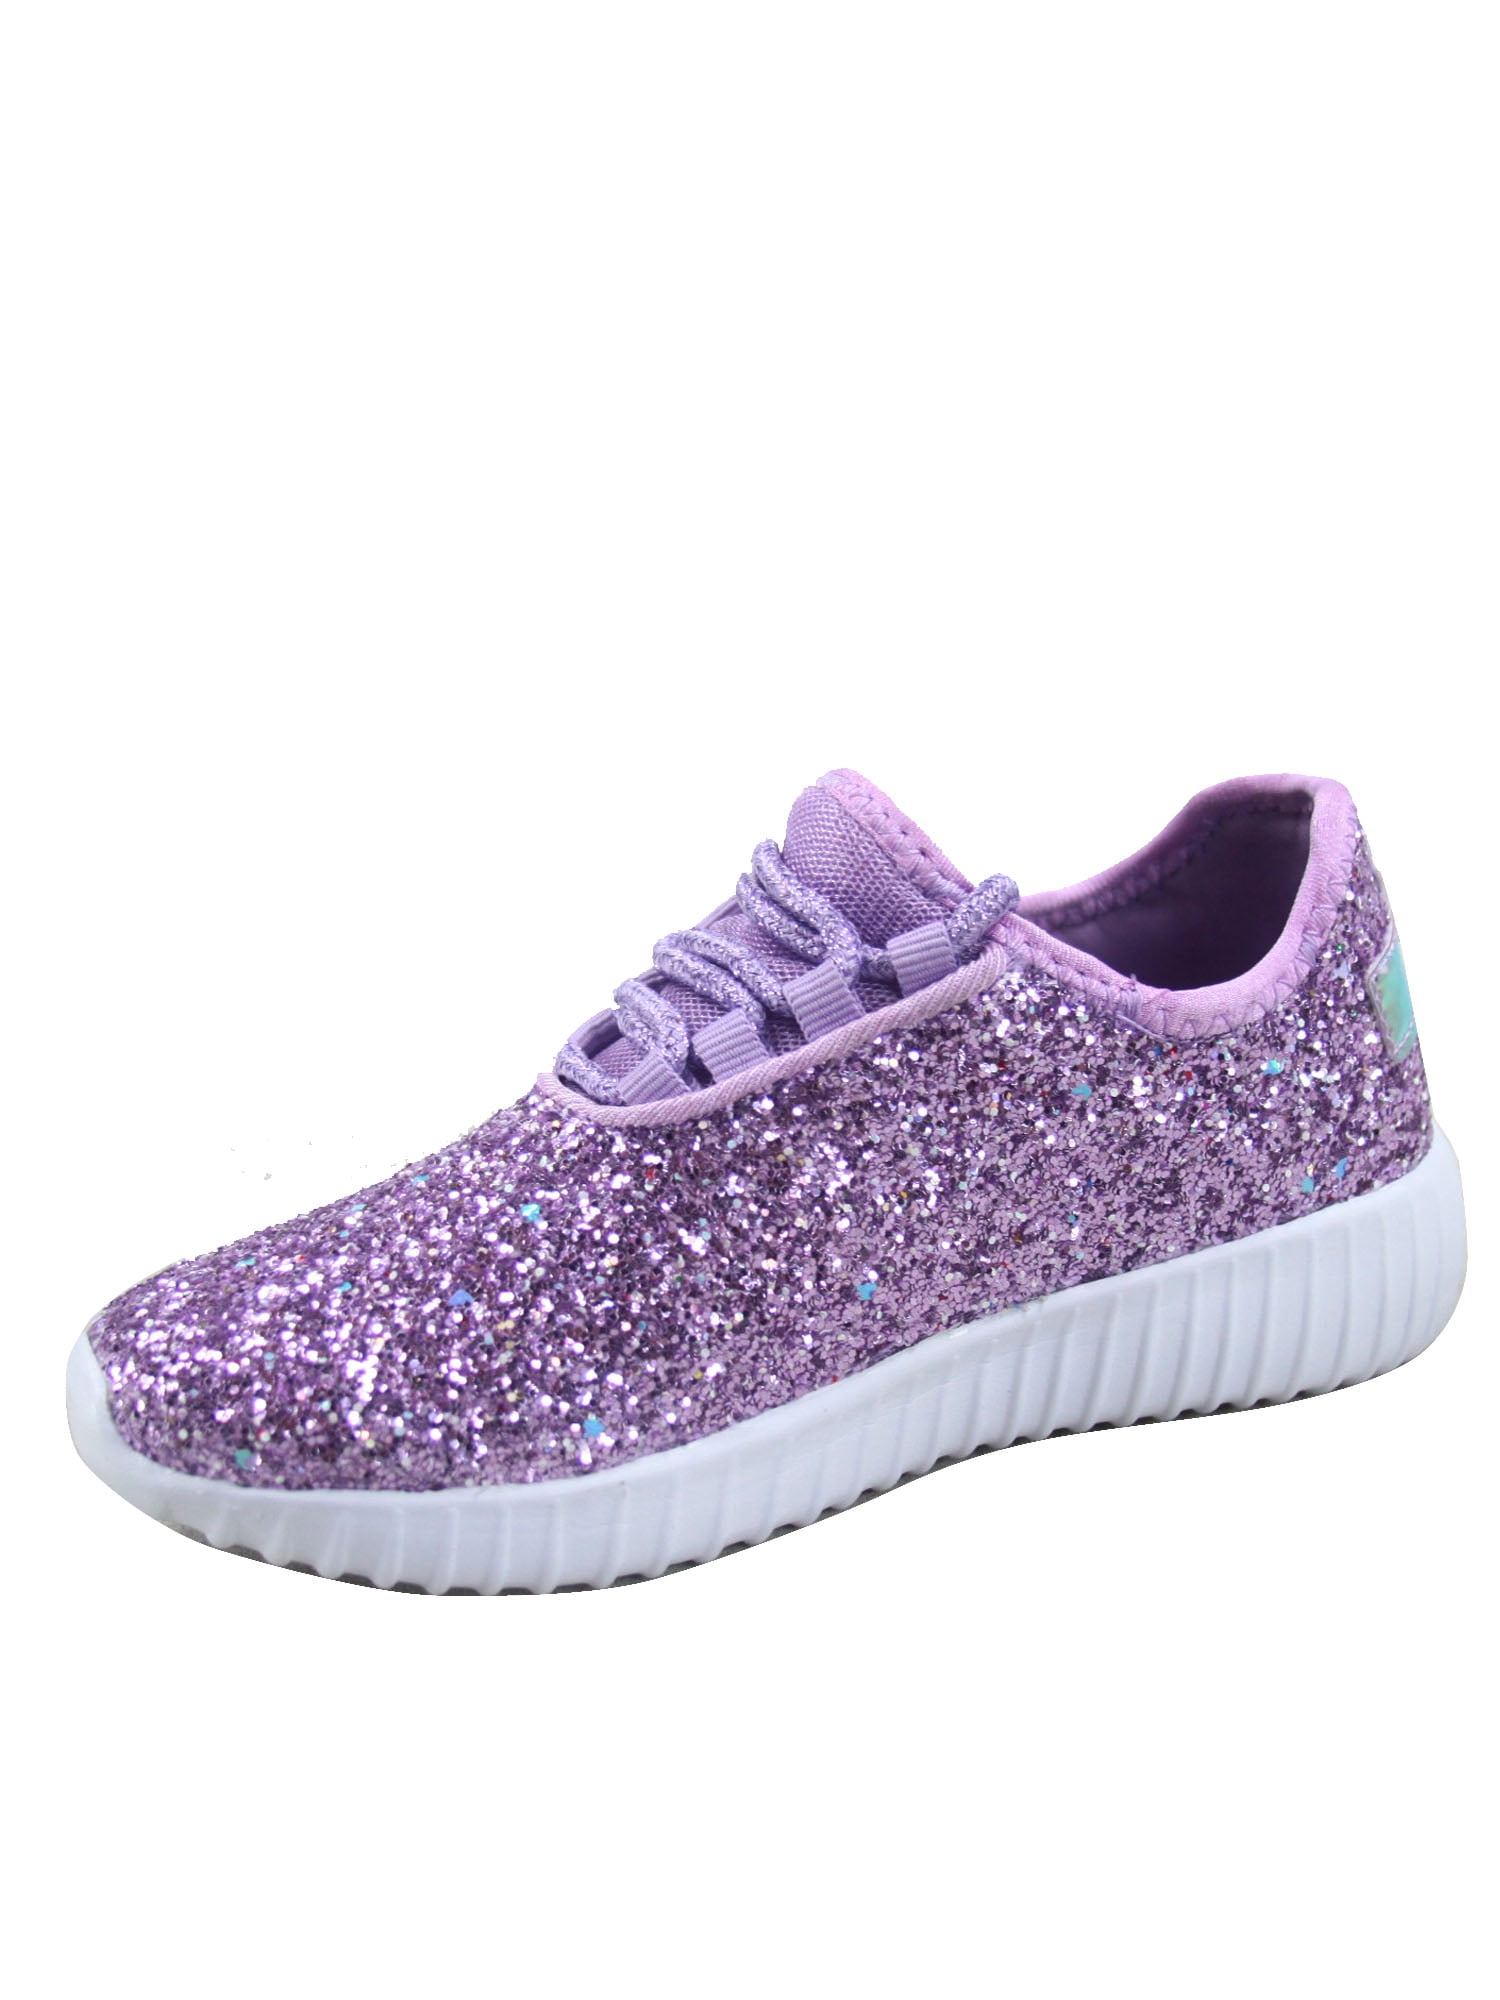 REMY-18 Sparkly Fashion Sneakers Shoes for Women! – Diosas Shoes